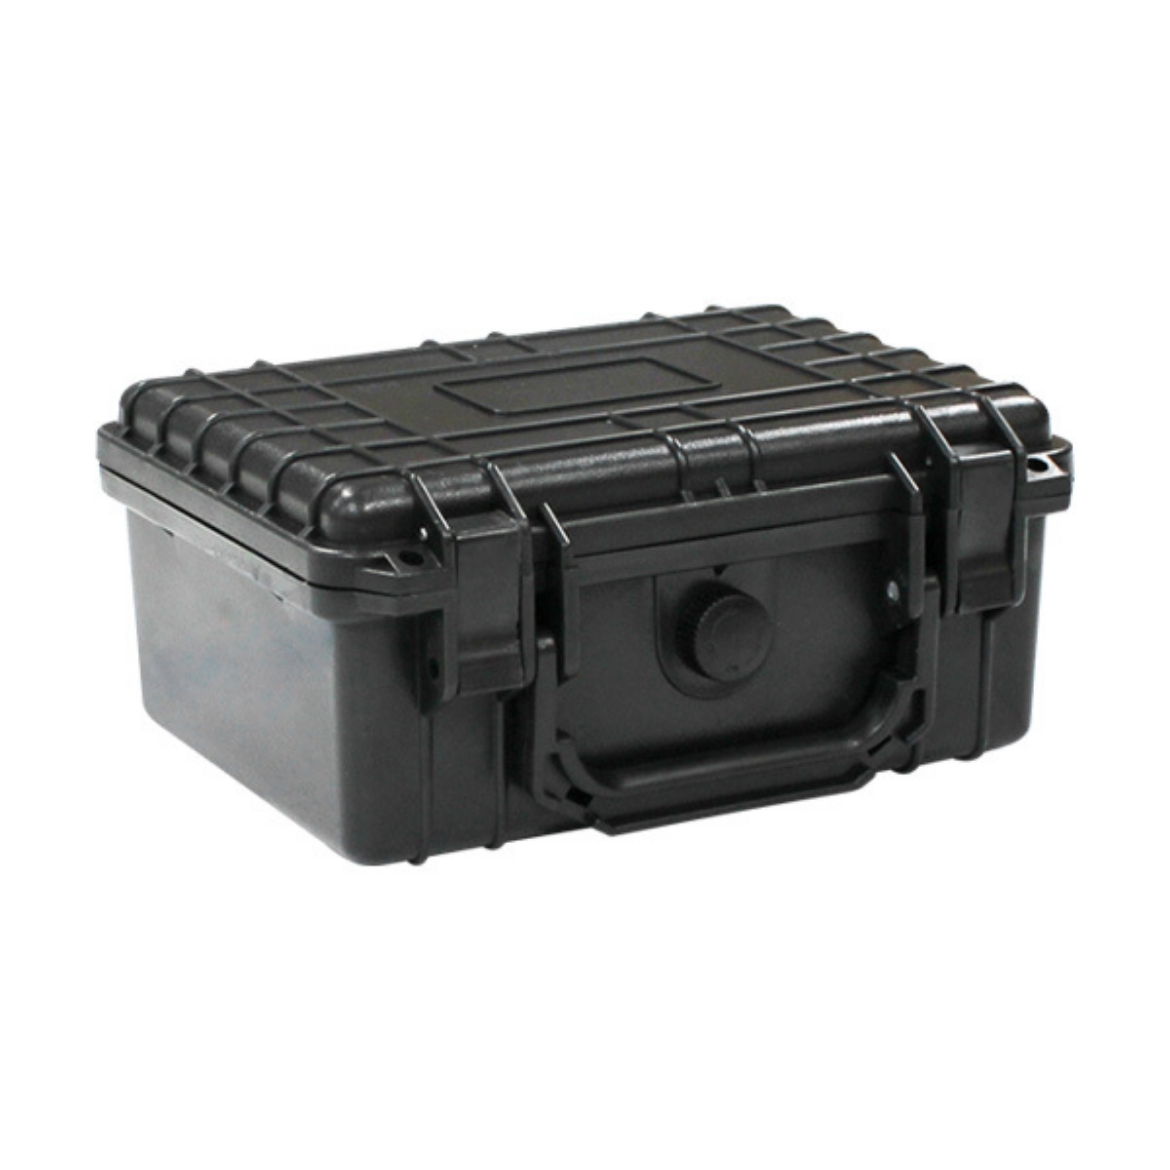 Picture of 232 x 192 x 111 WATER AND SHOCK PROOF SEALCASE (SAFE CASE)